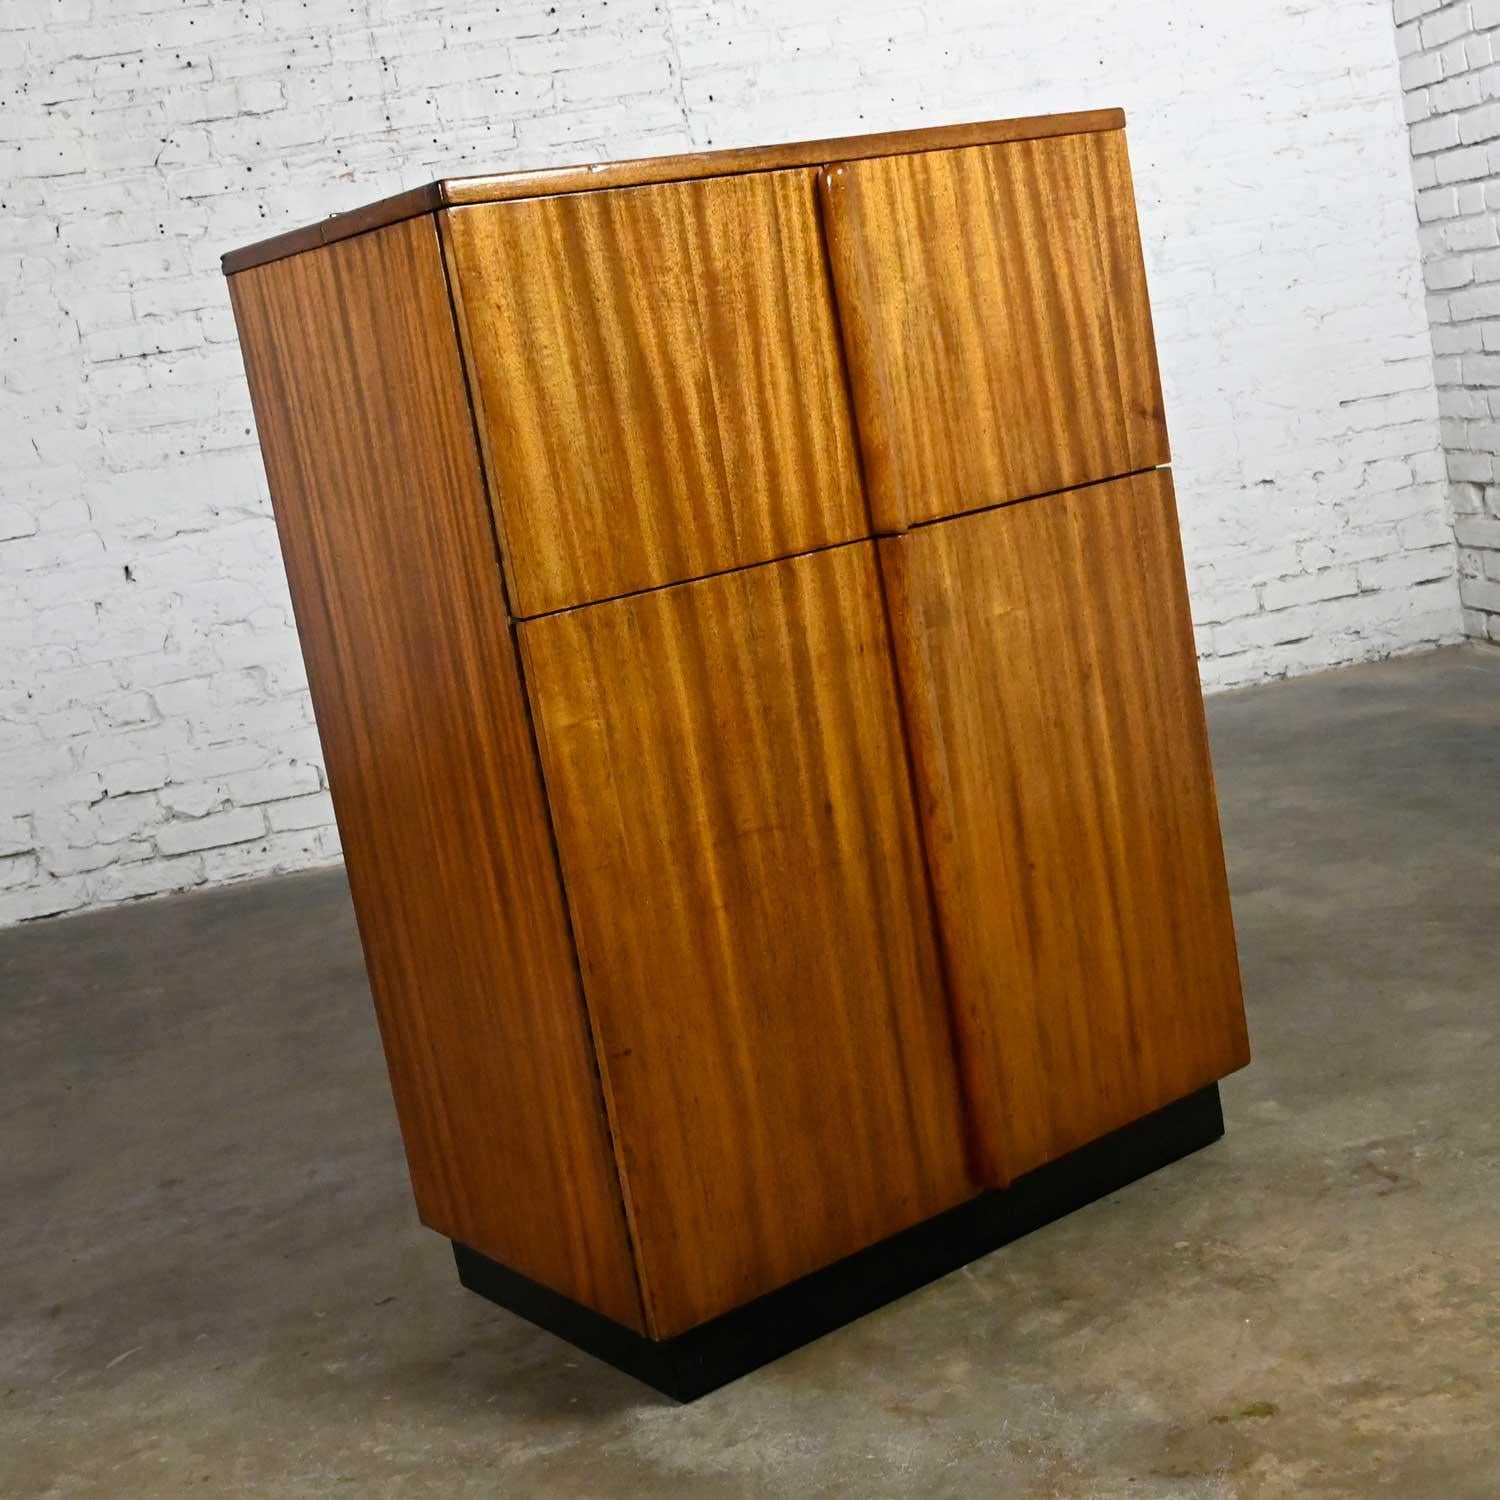 Vintage Art Deco Philippine Mahogany Dry Bar or Liquor Cabinet In Good Condition For Sale In Topeka, KS